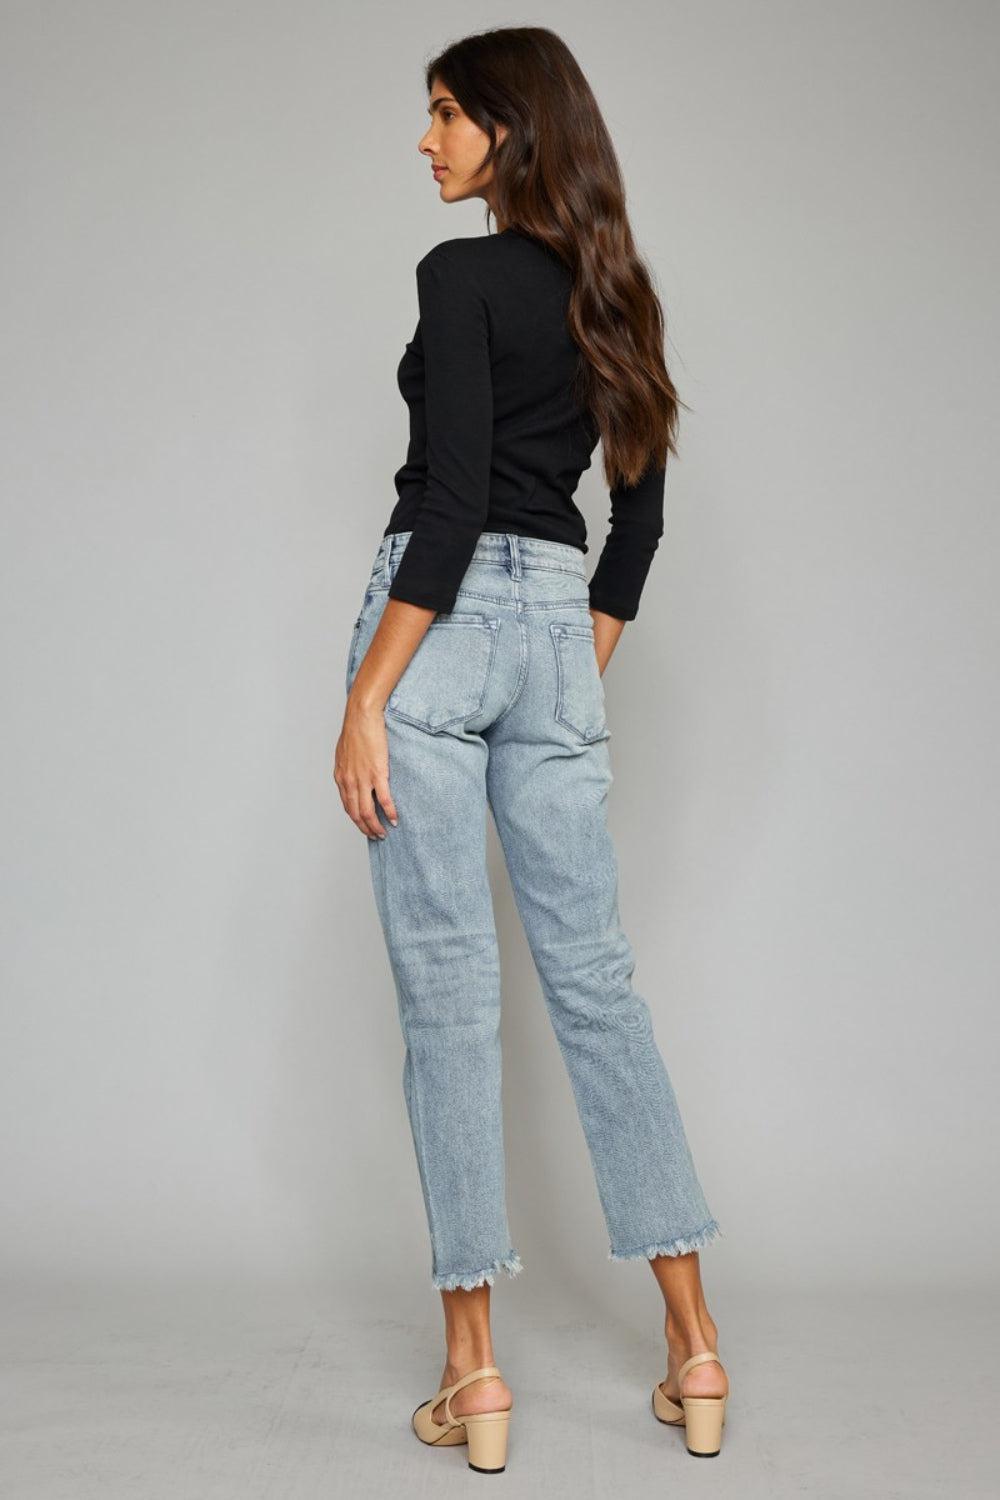 a woman wearing high rise jeans and a black top